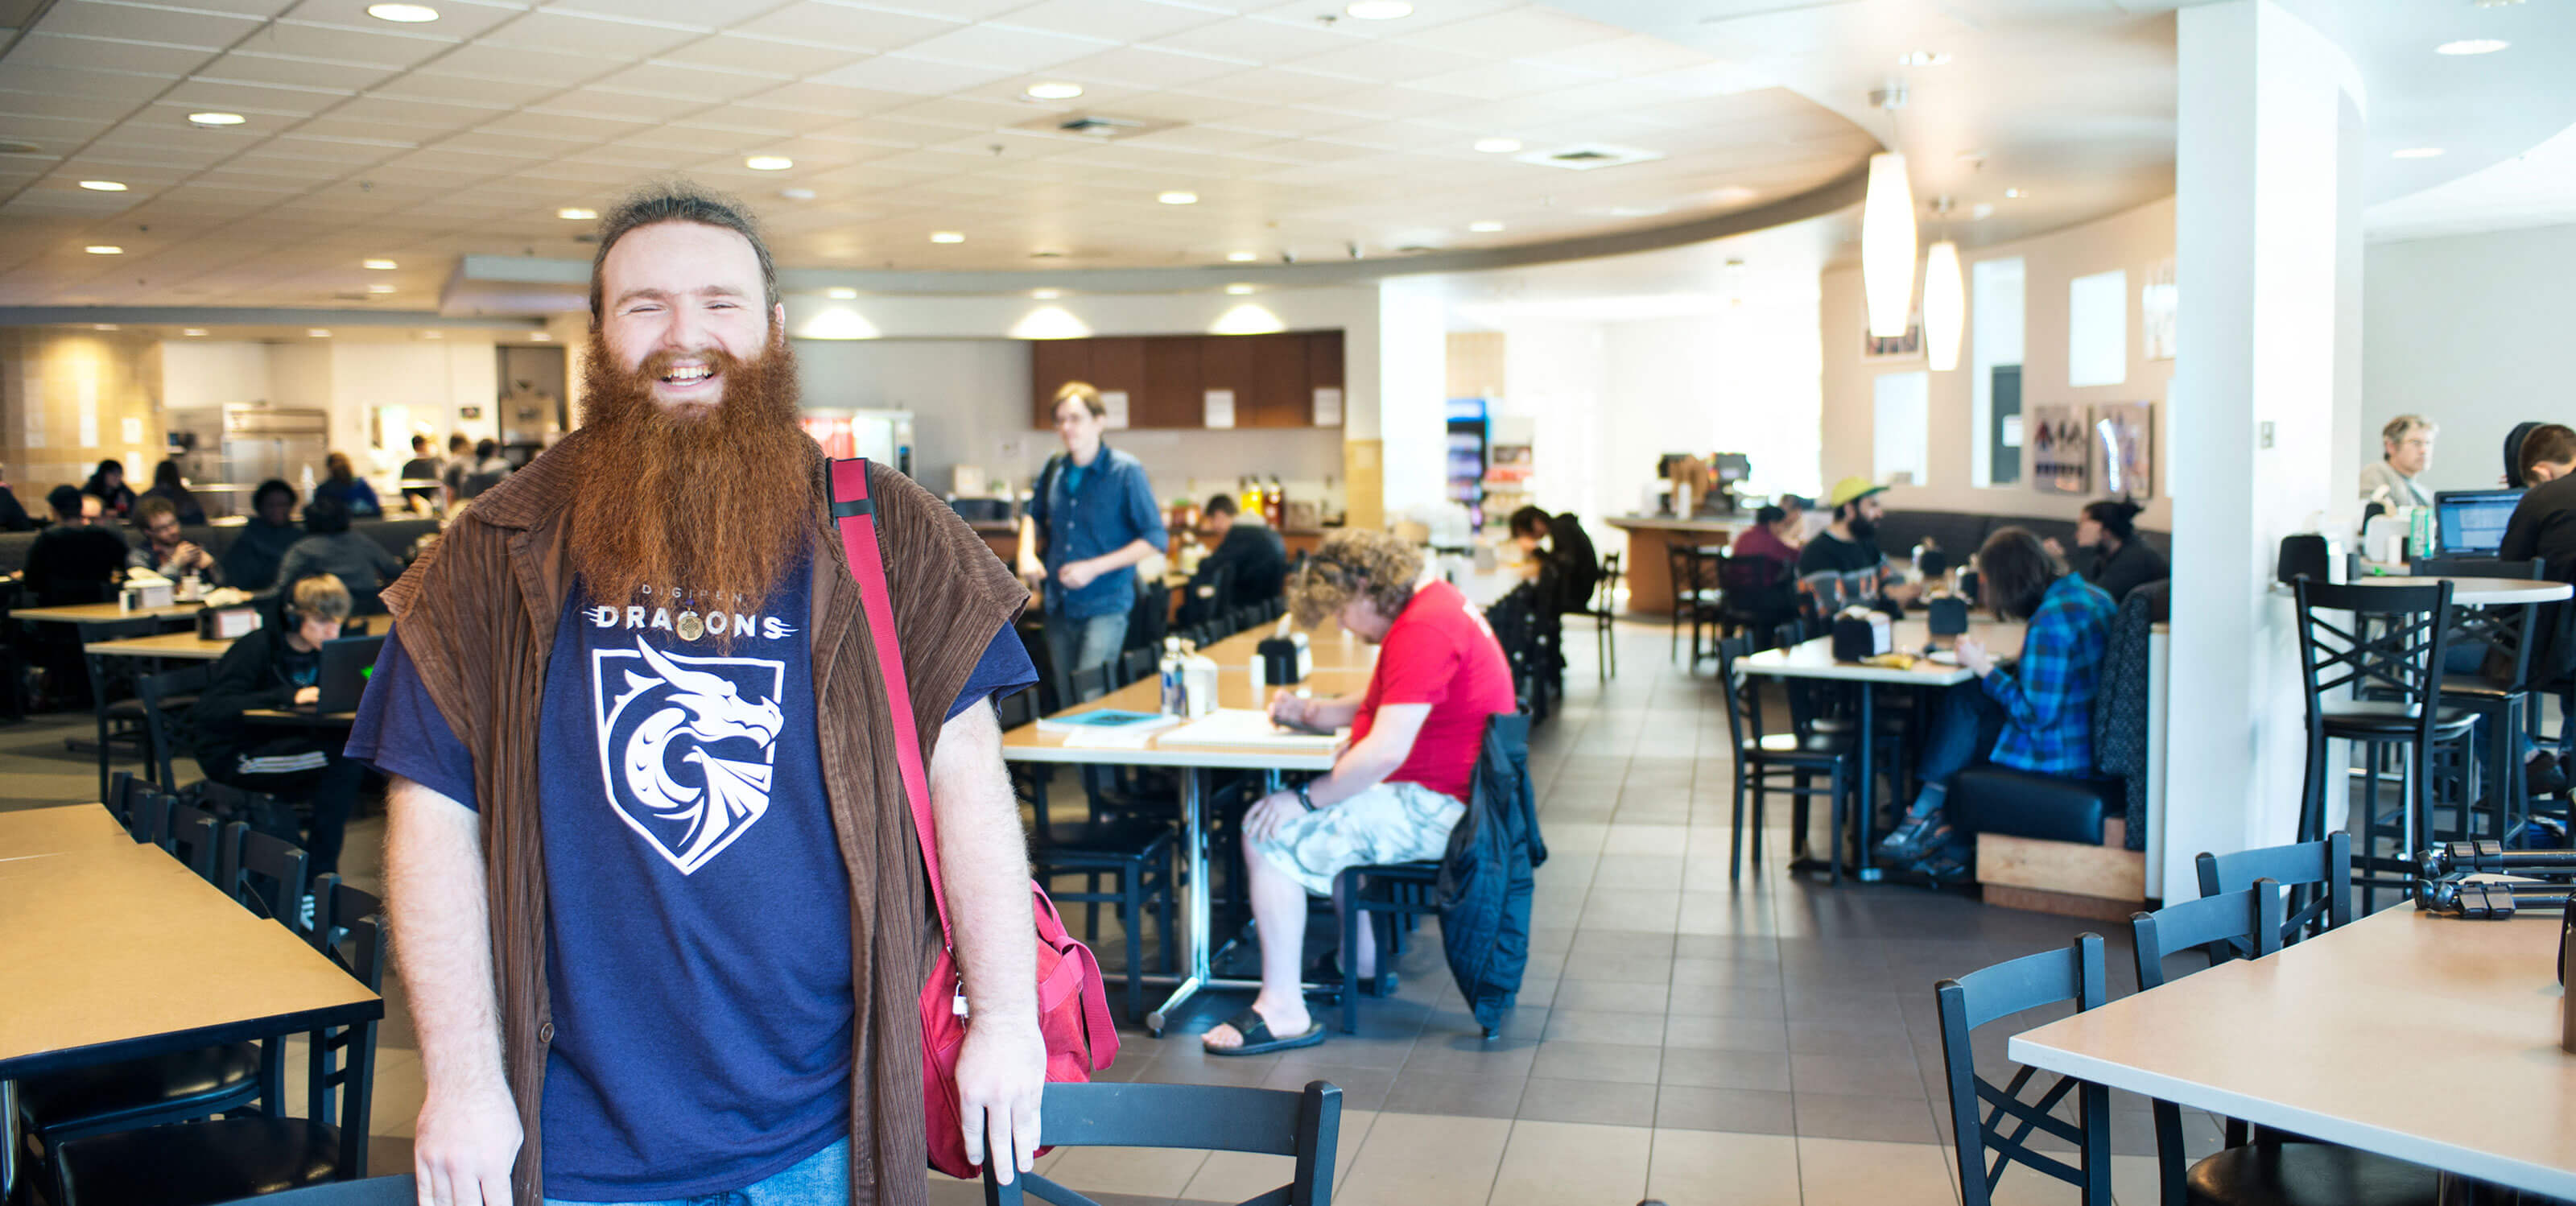 A smiling, bearded man wearing a purple, dragon-logo t-shirt stands in a dining hall where others are seated at tables.